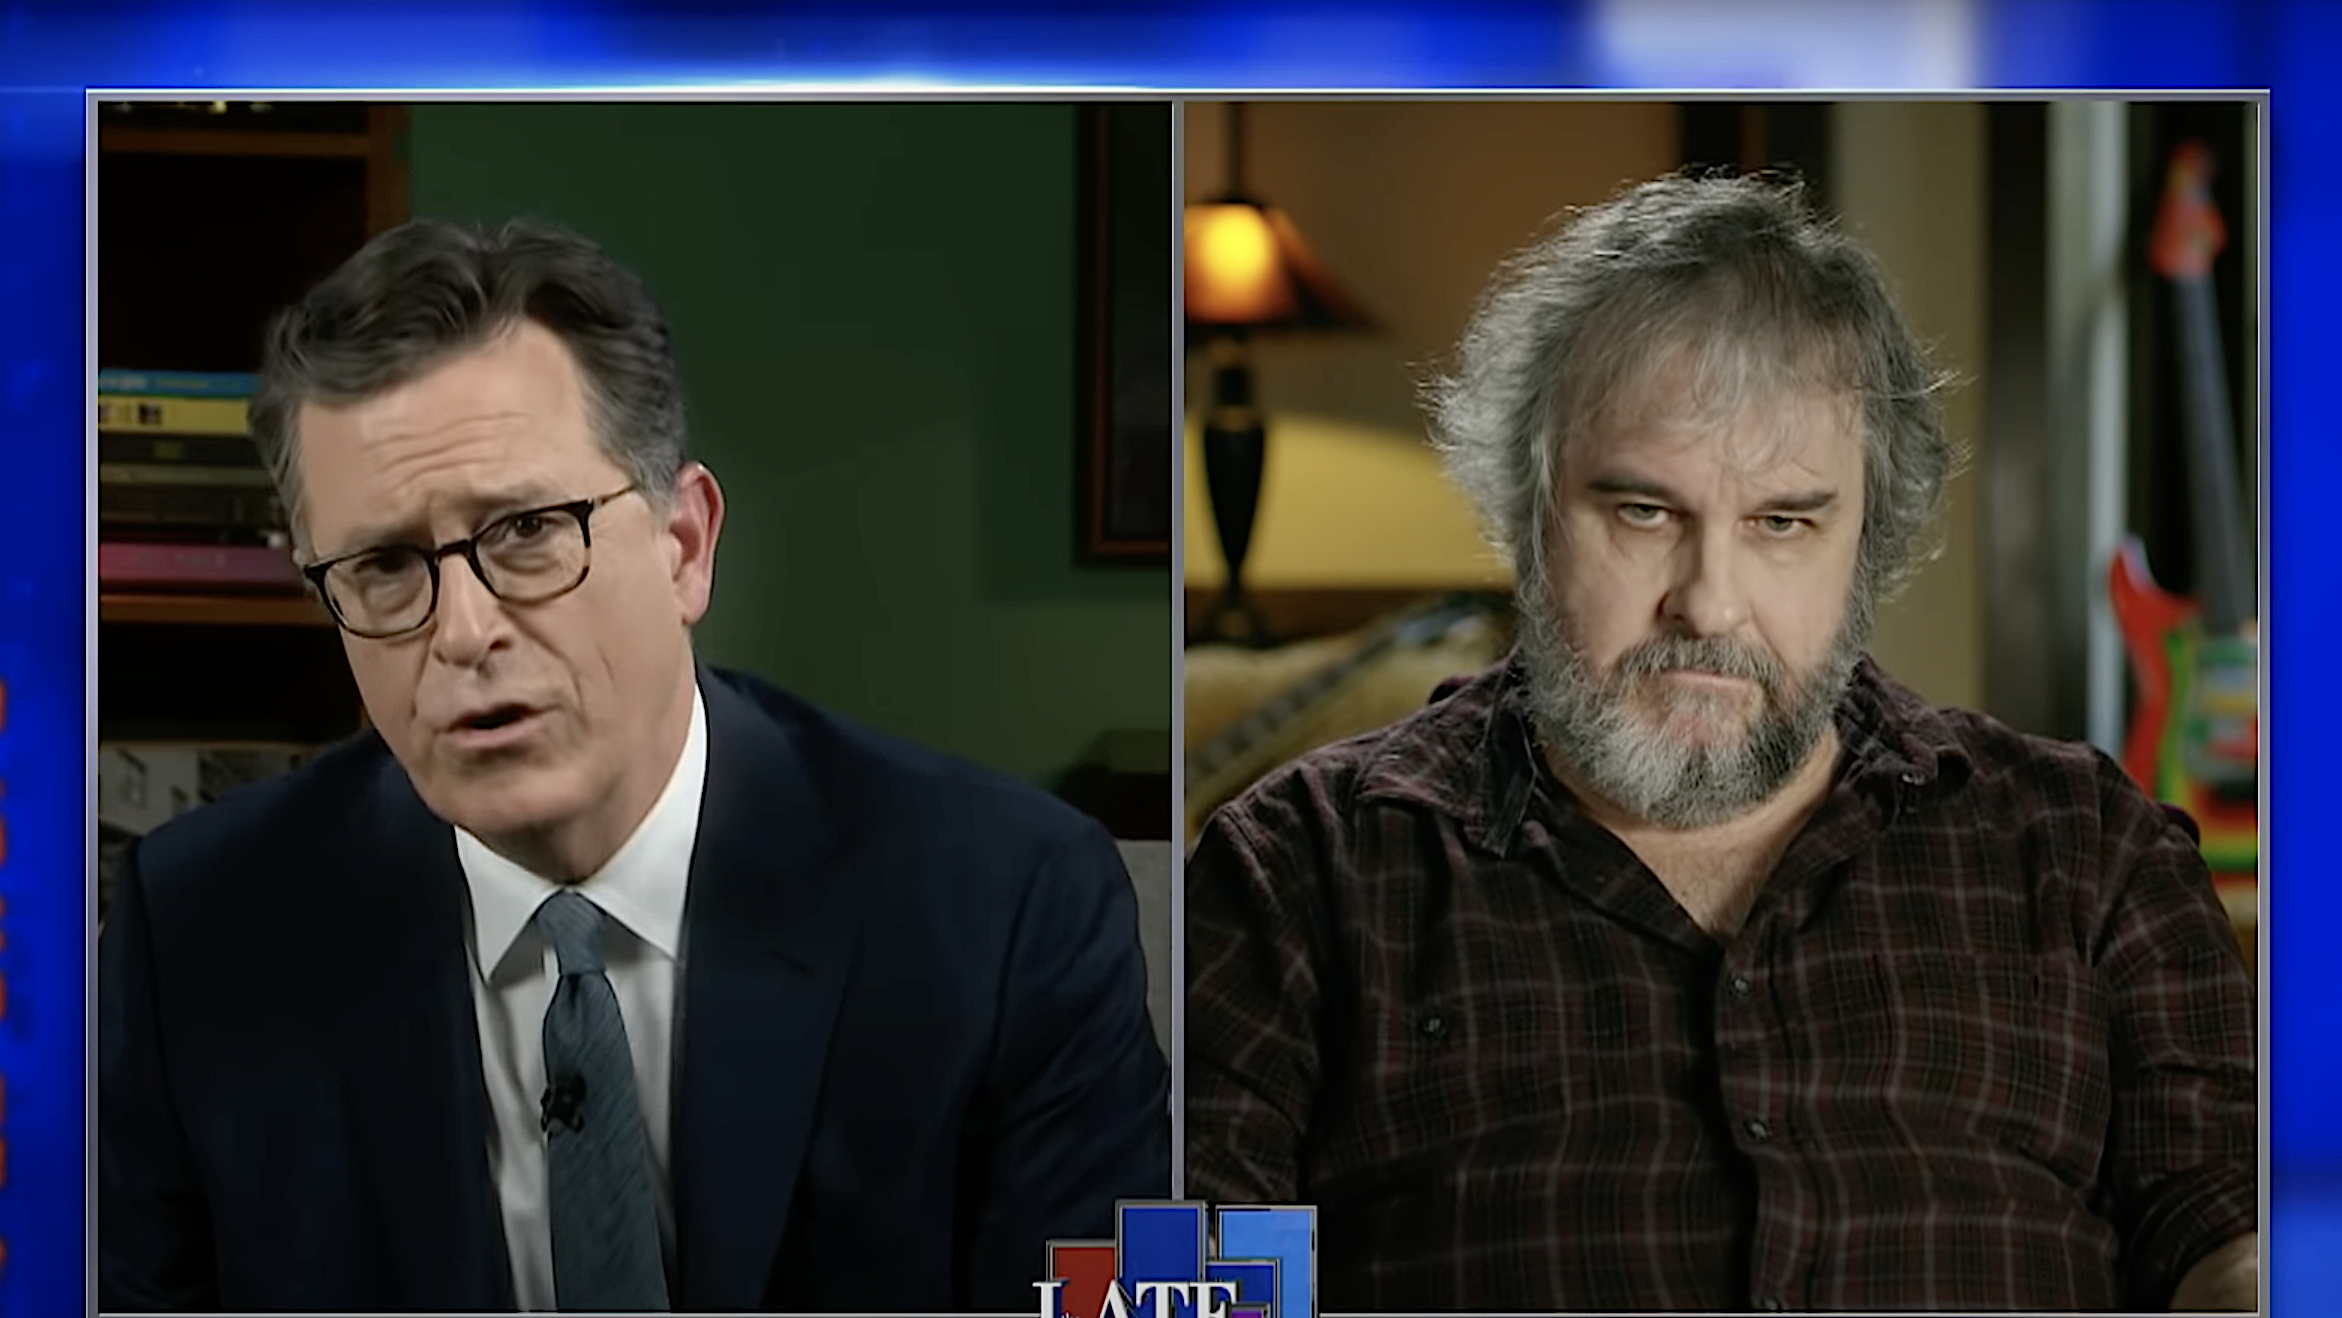 Stephen Colbert makes Peter Jackson recast The Lord Of The Rings with The Beatles